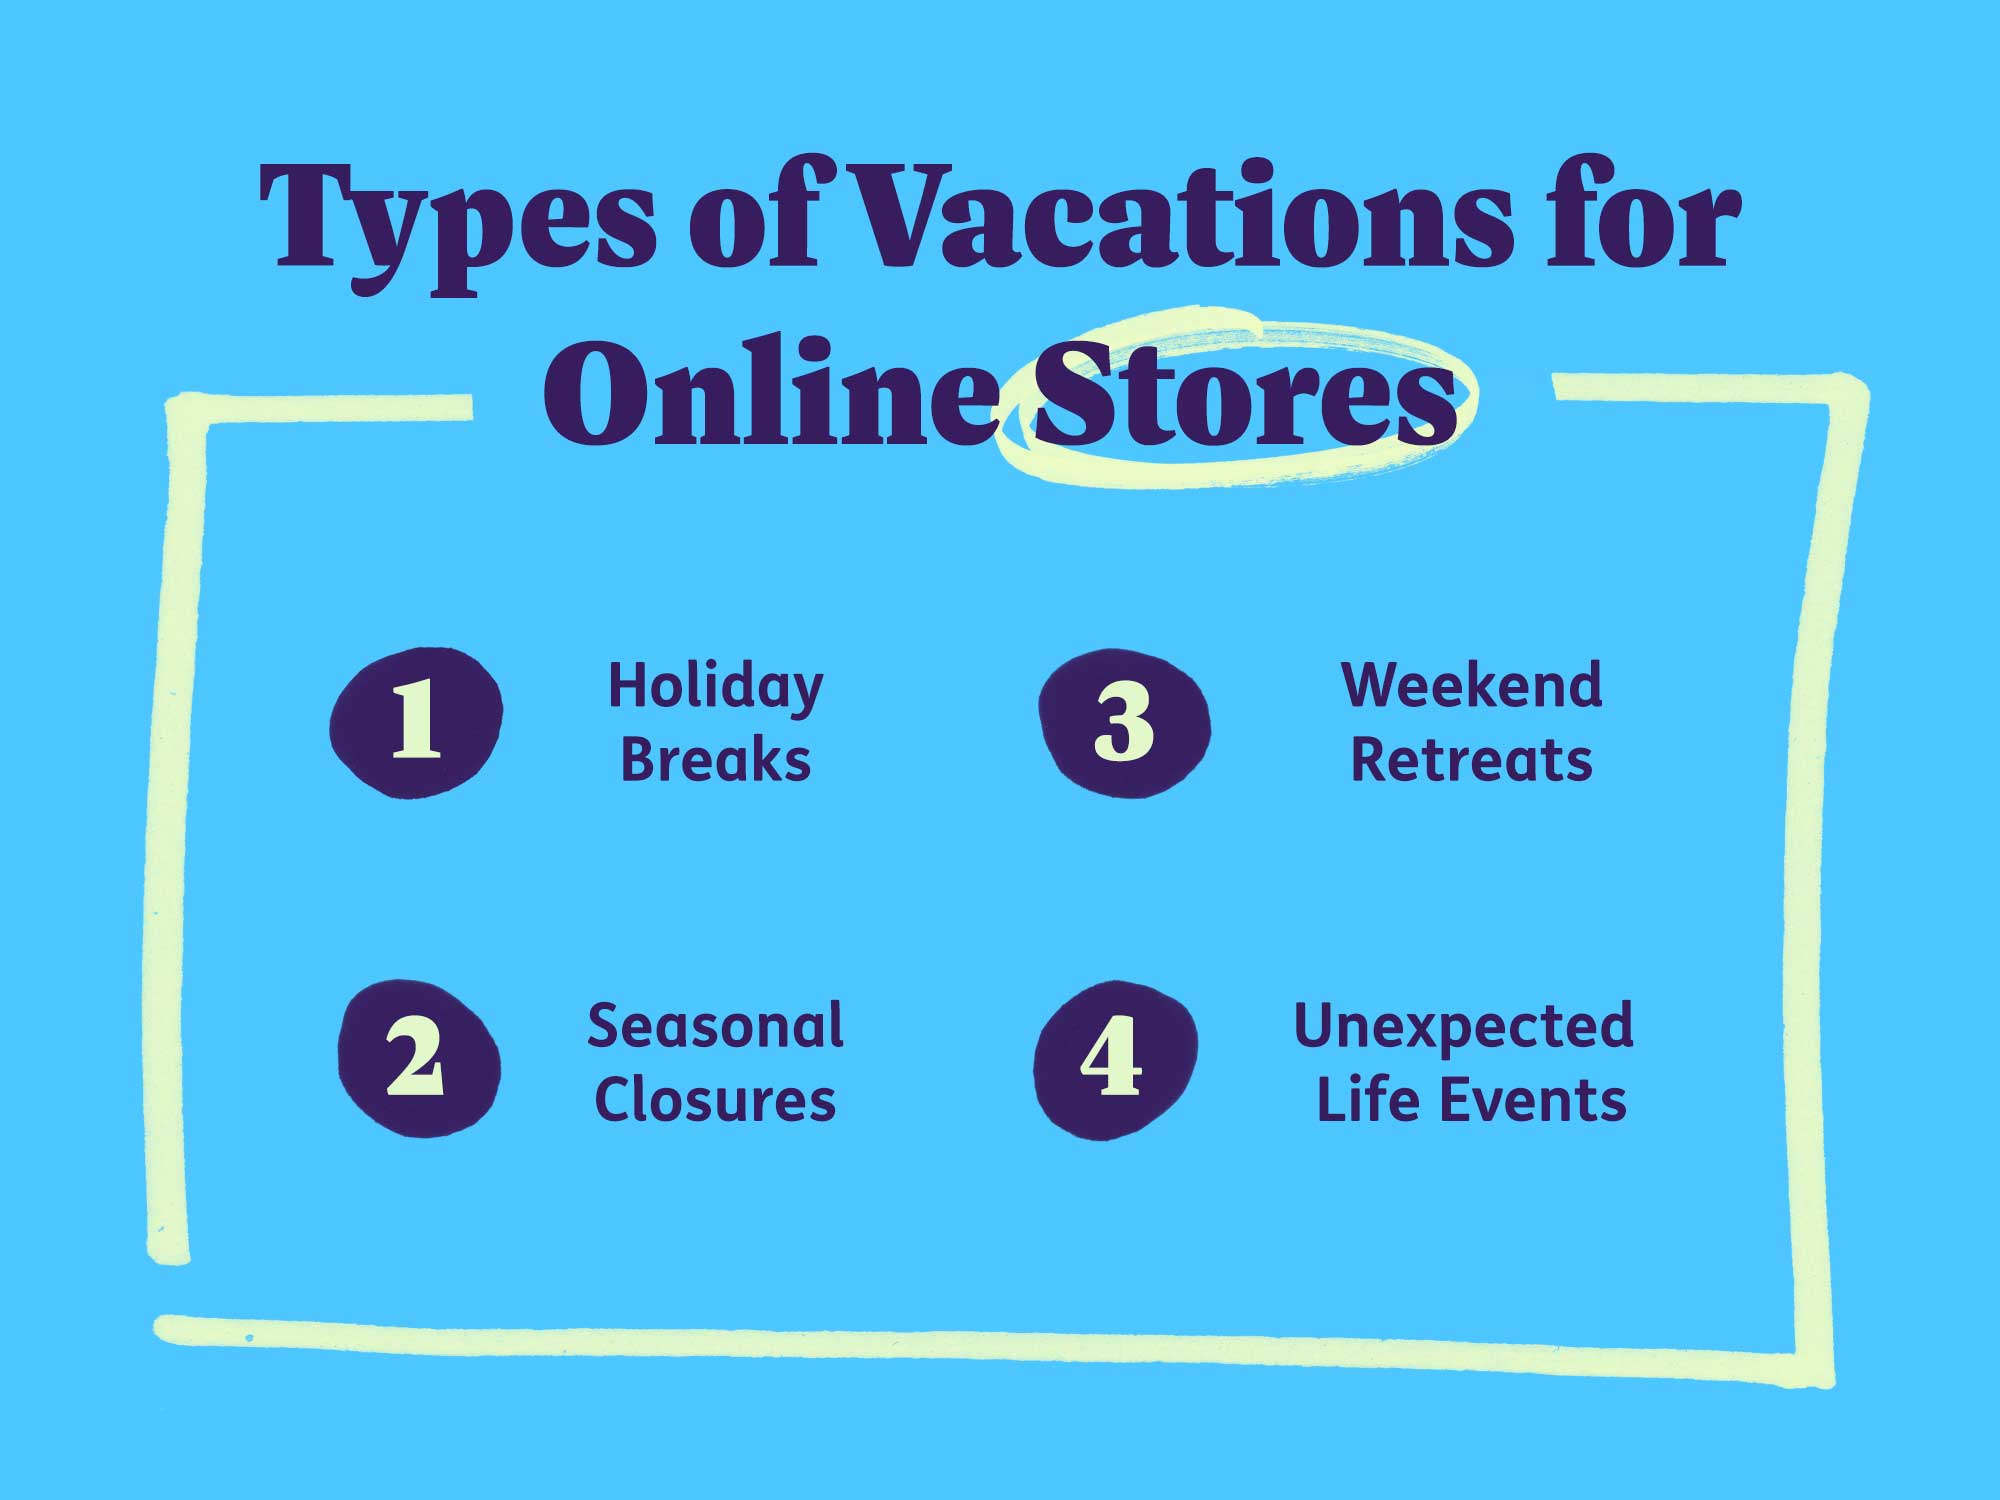 Types of vacations for online stores: holiday breaks, seasonal closures, weekend retreats, unexpected life events